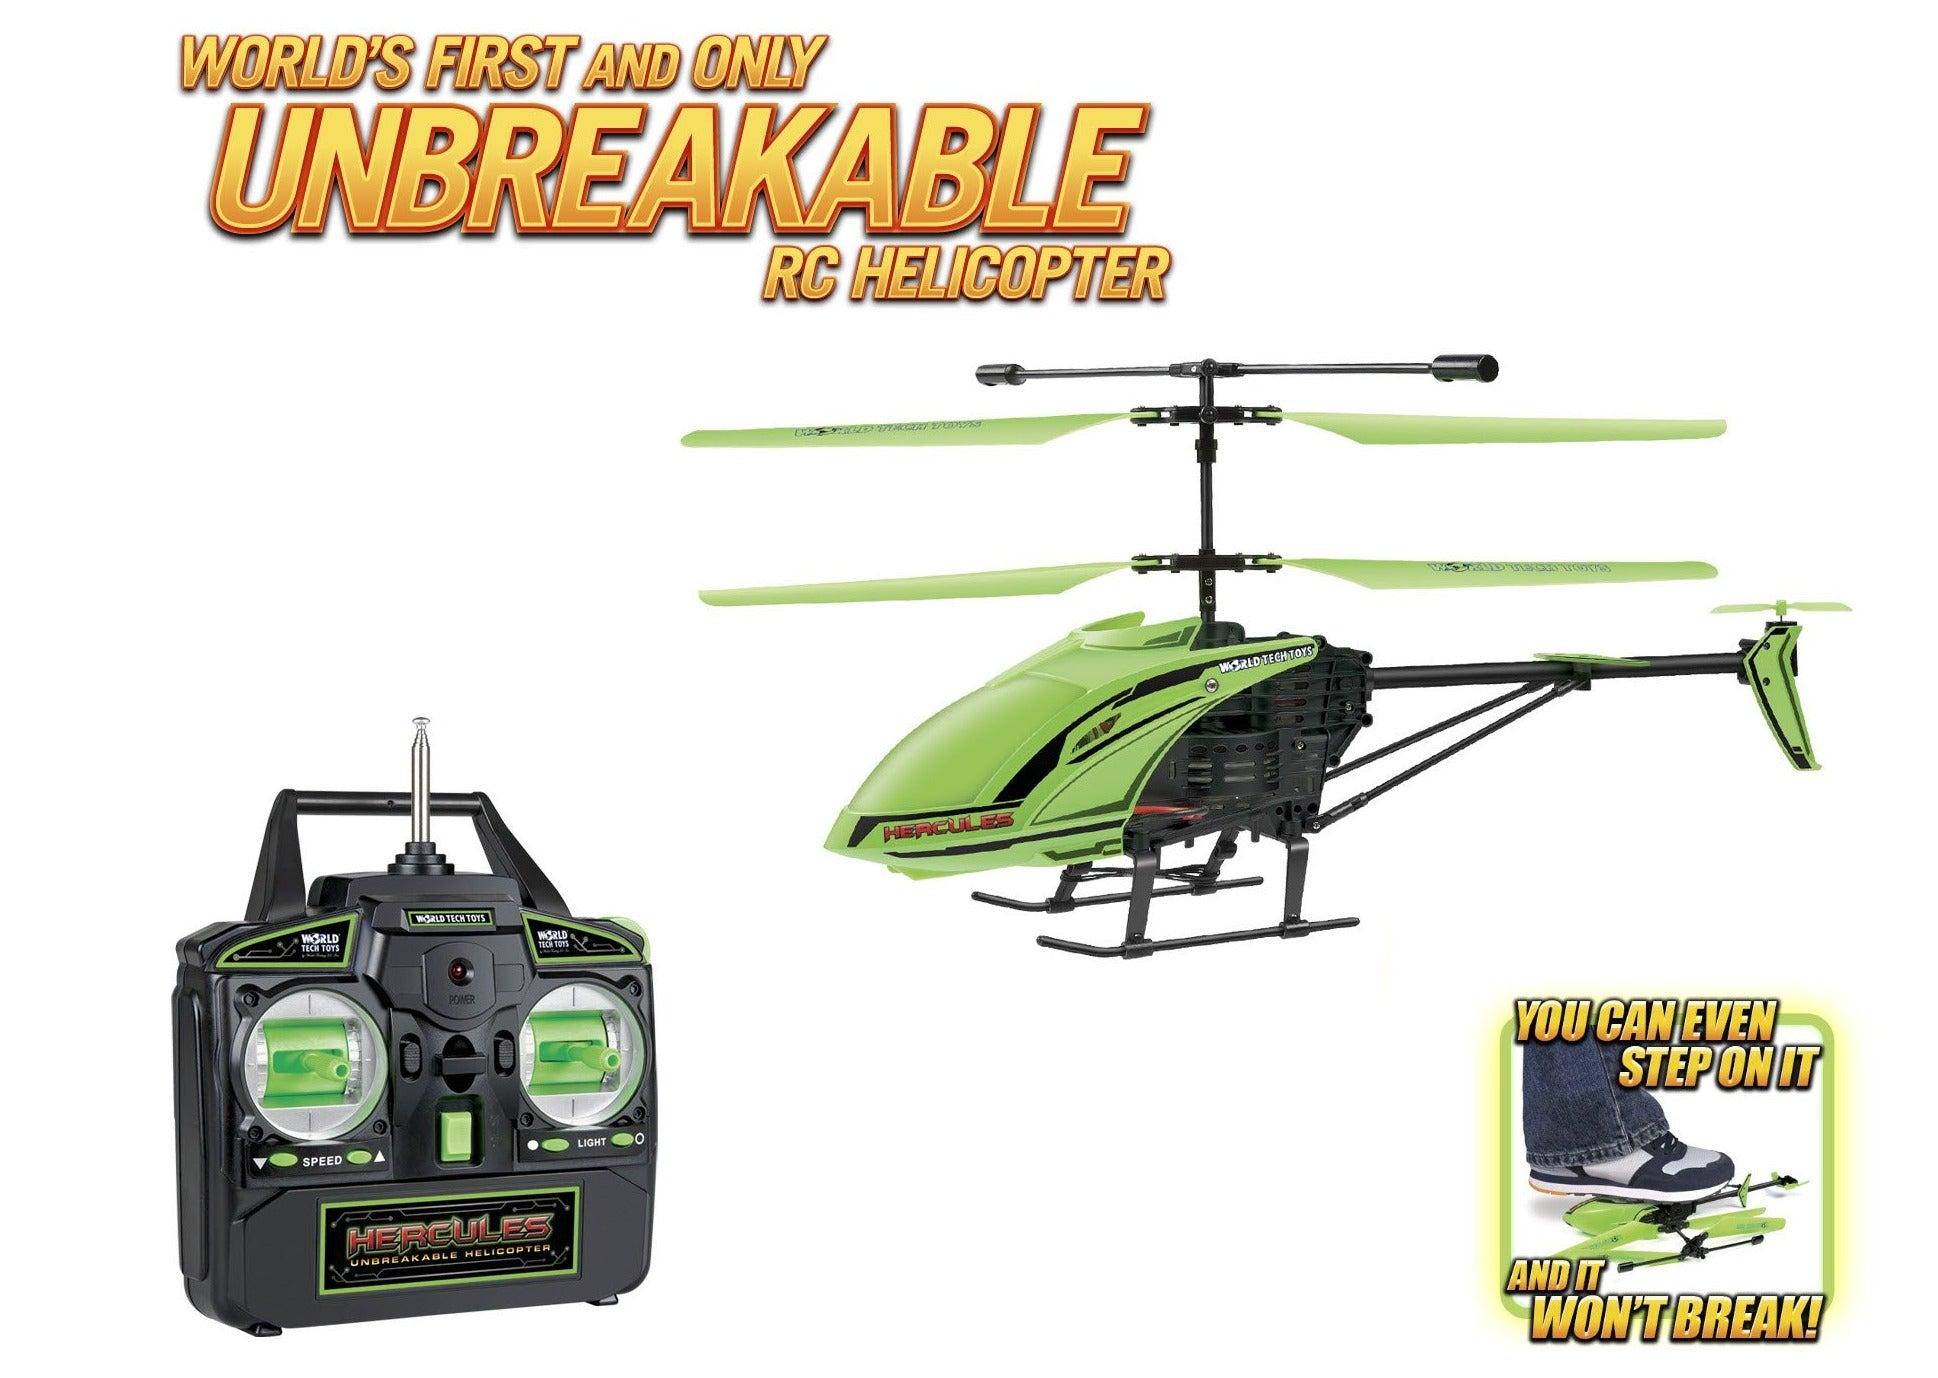 Hercules Rc Helicopter: Practical Applications and Uses of the Hercules RC Helicopter